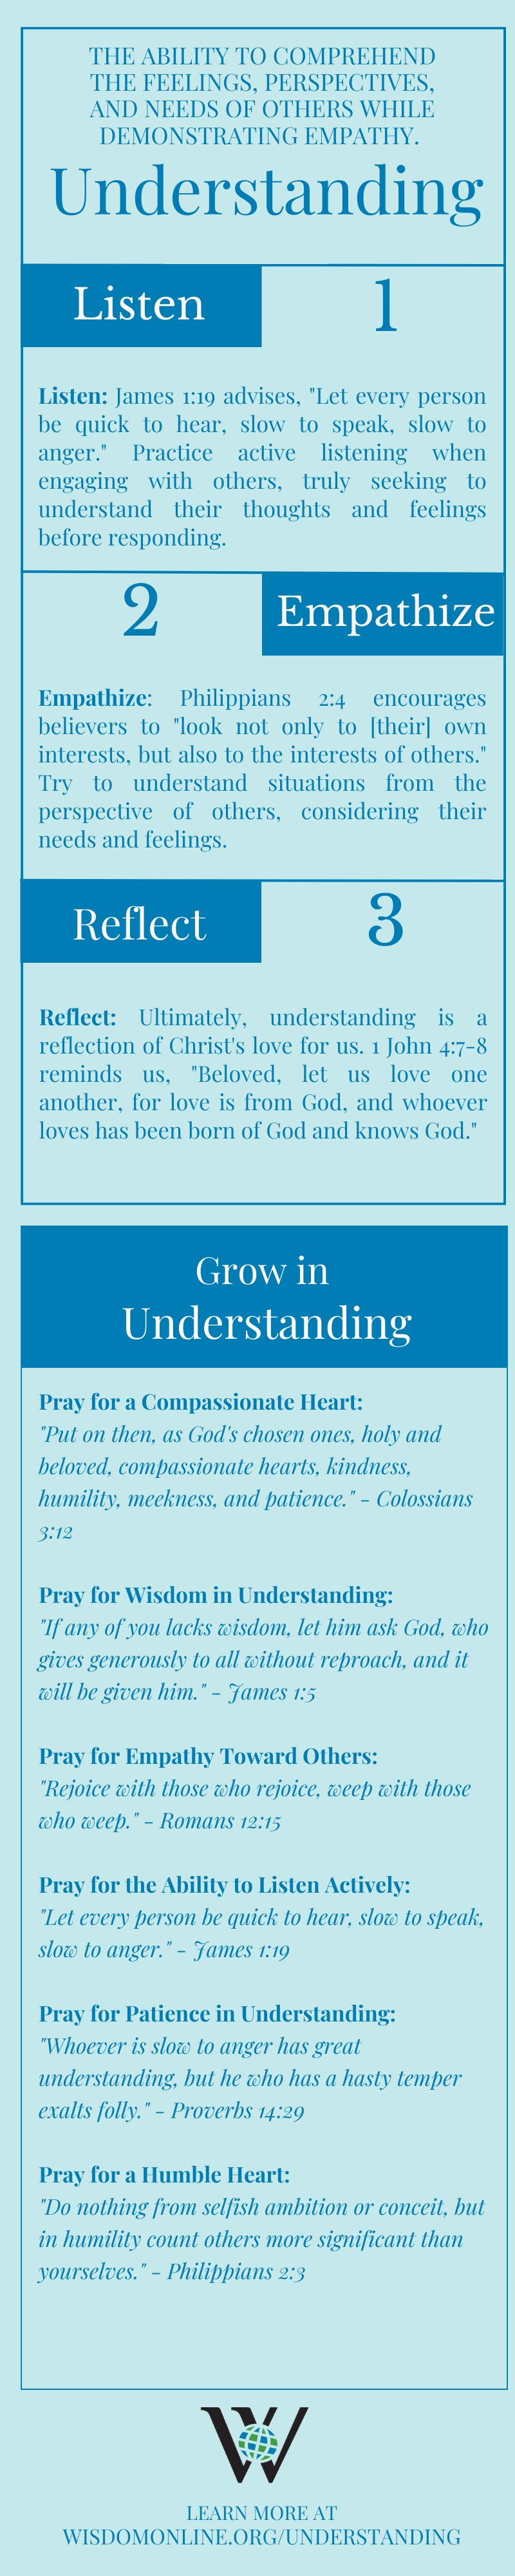 Infographic on the Biblical characteristic of Guidance